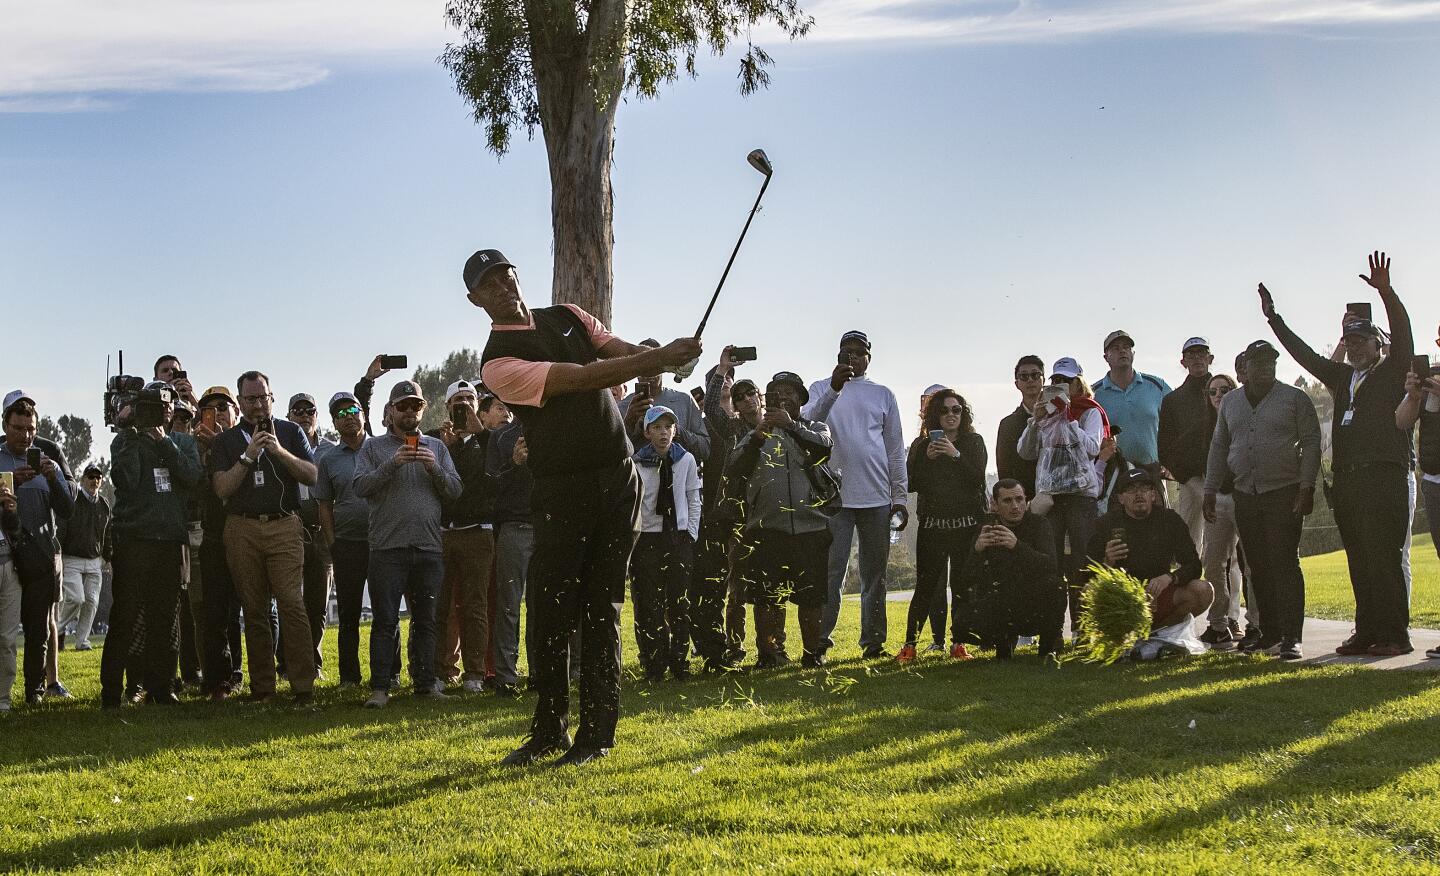 Tiger Woods as he hits out of the rough on the 18th hole during the first round of the Genesis Invitational at Riviera Country Club on Feb. 13, 2020.